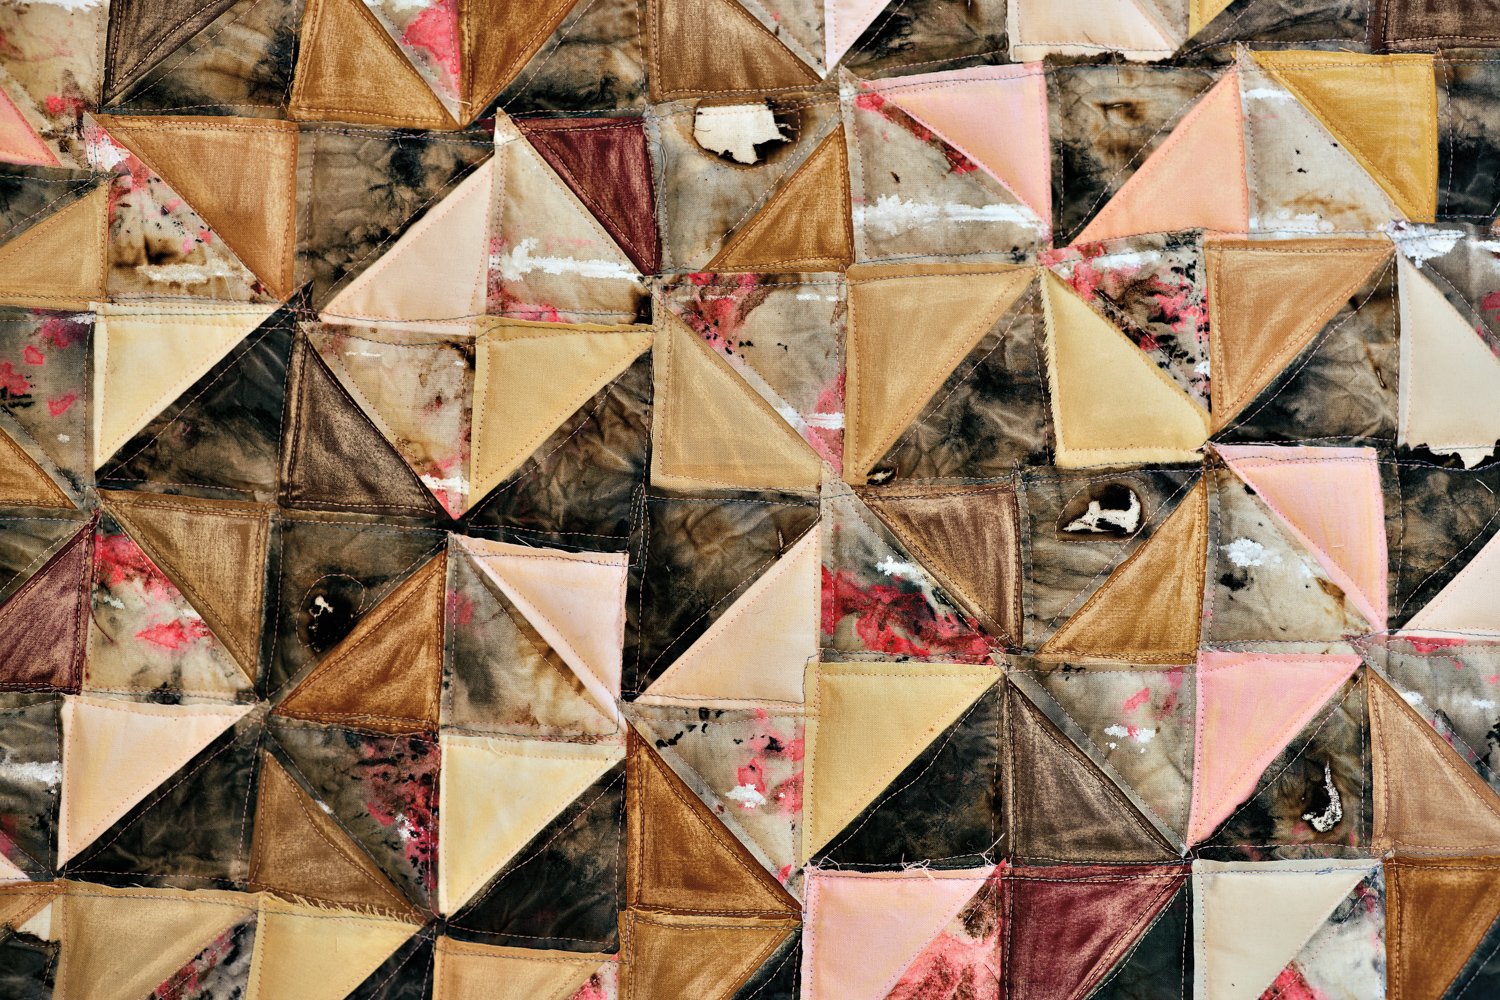 A recent work by regina jestrow composed of hand-dyed fabric fragments